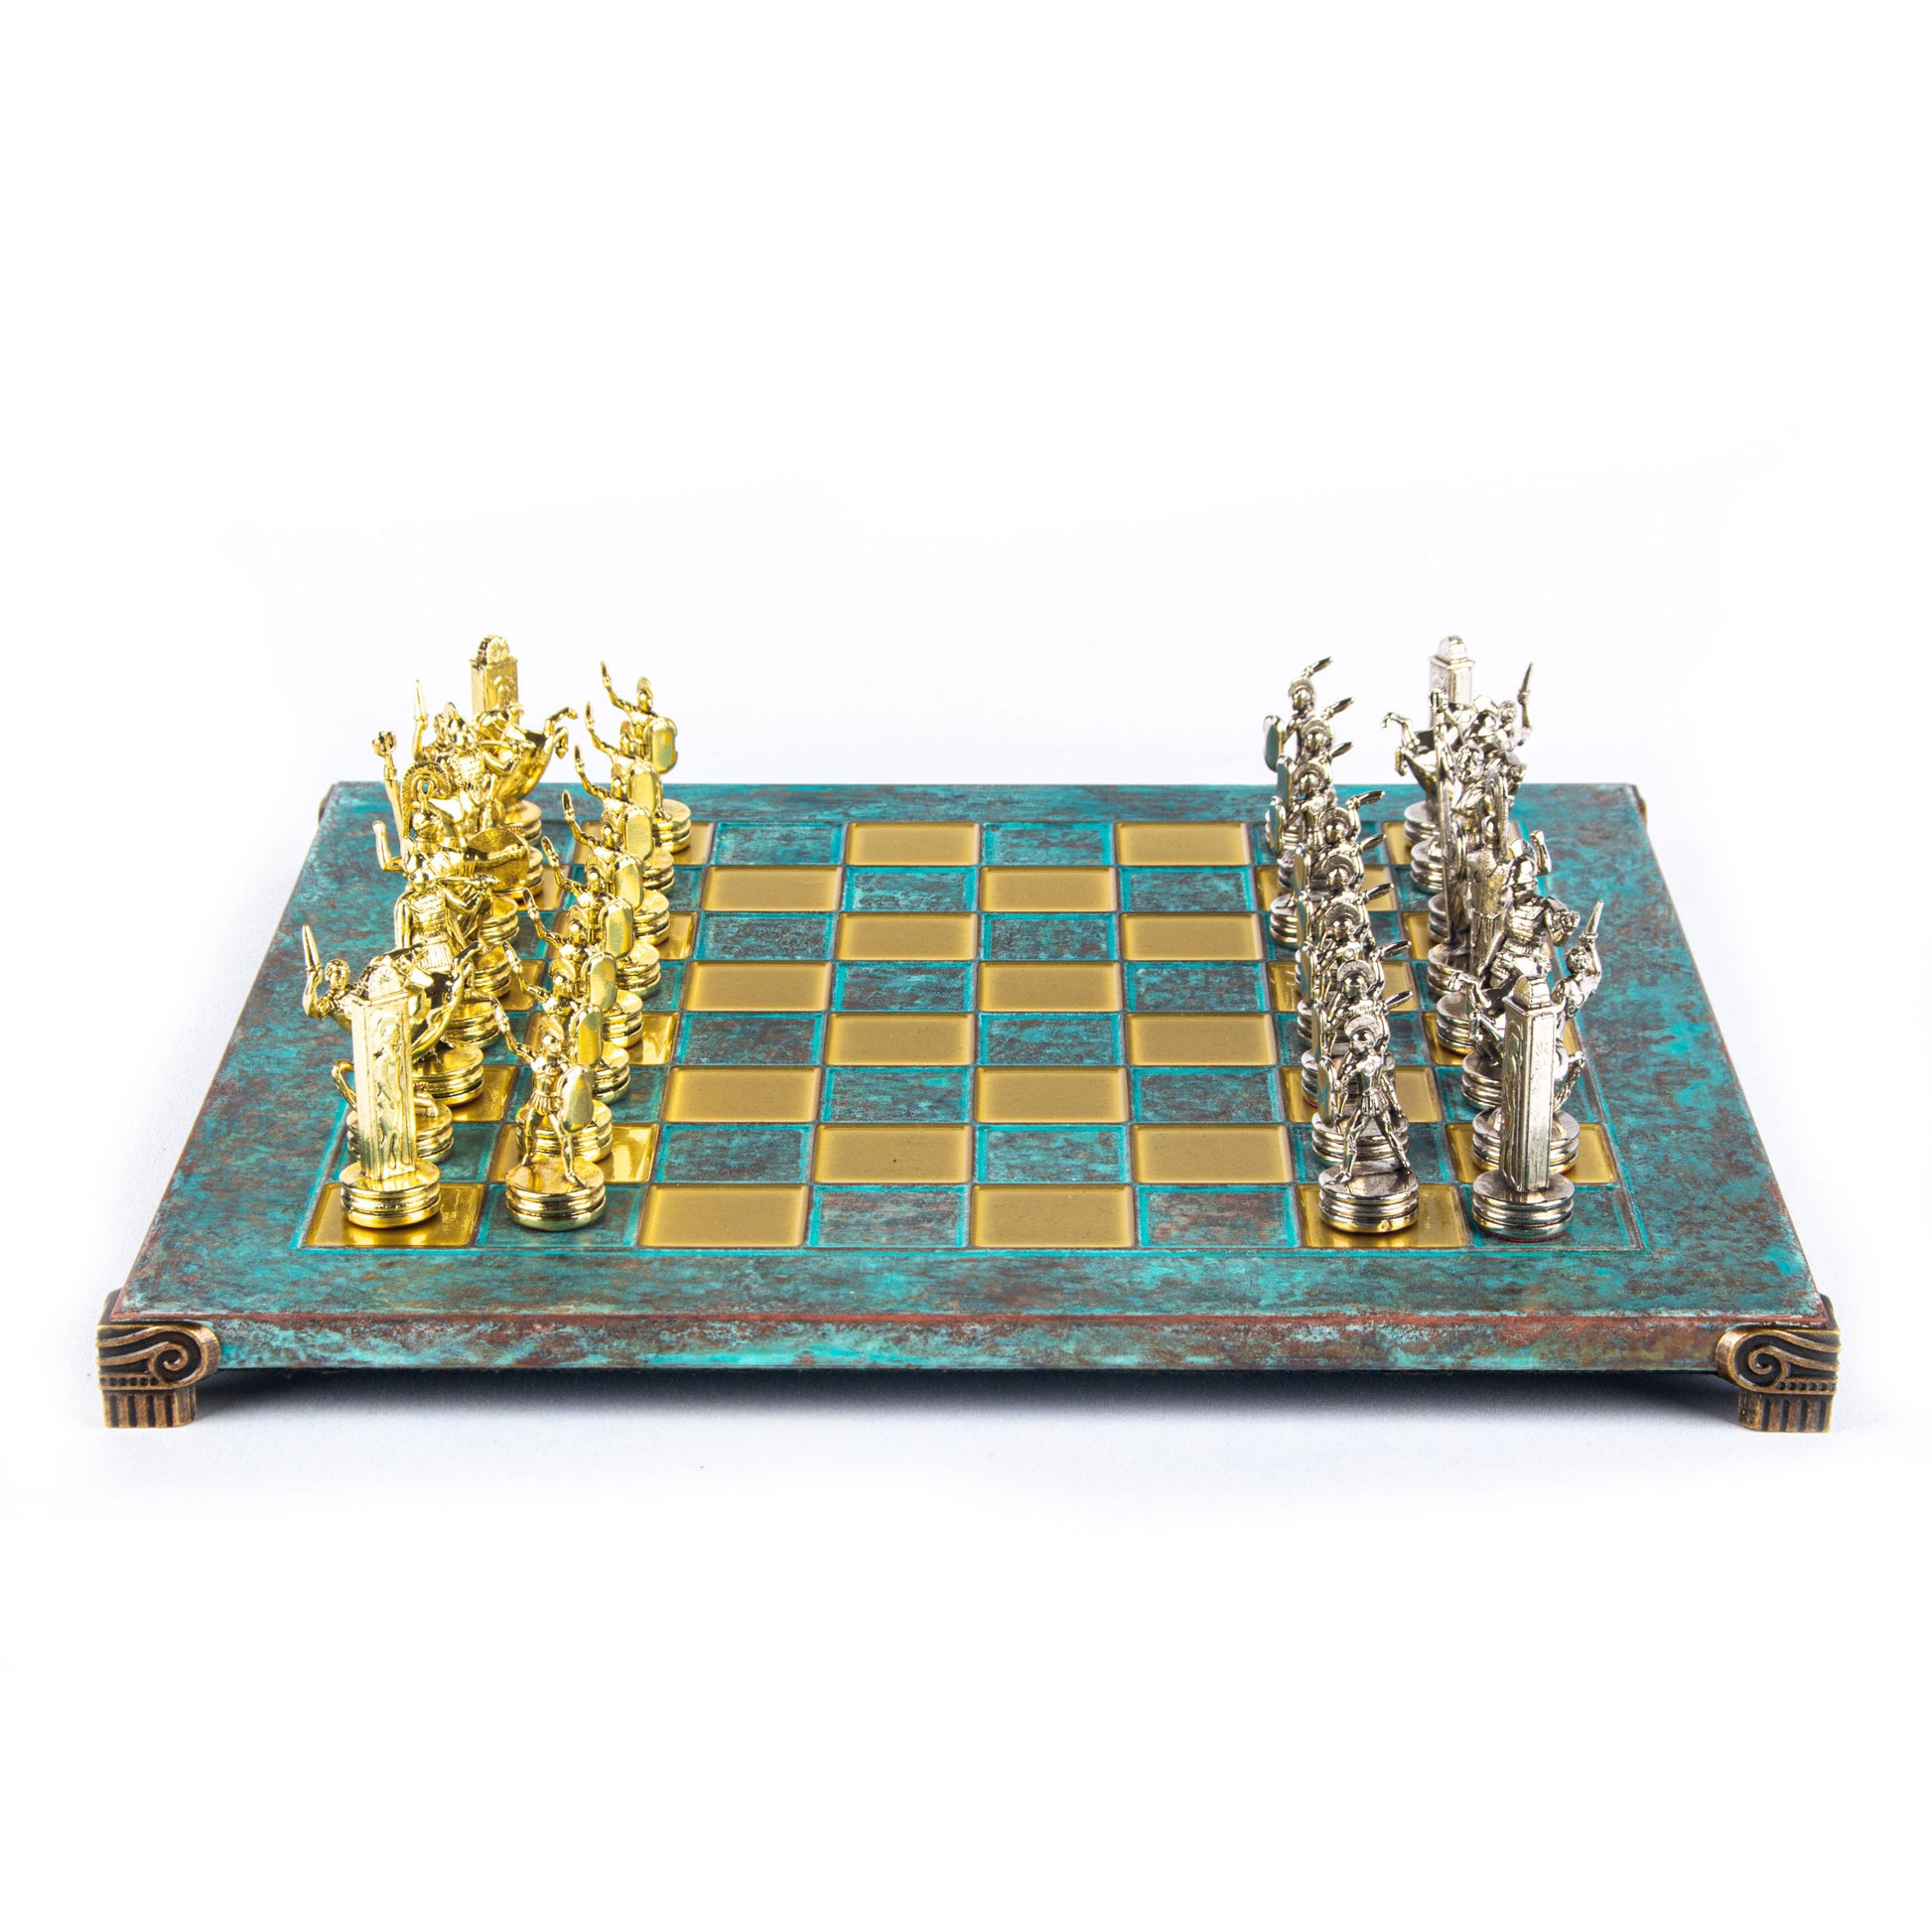 GREEK MYTHOLOGY CHESS SET with gold/silver chessmen and bronze chessboard 36 x 36cm (Medium) - Premium Chess from MANOPOULOS Chess & Backgammon - Just €210! Shop now at MANOPOULOS Chess & Backgammon